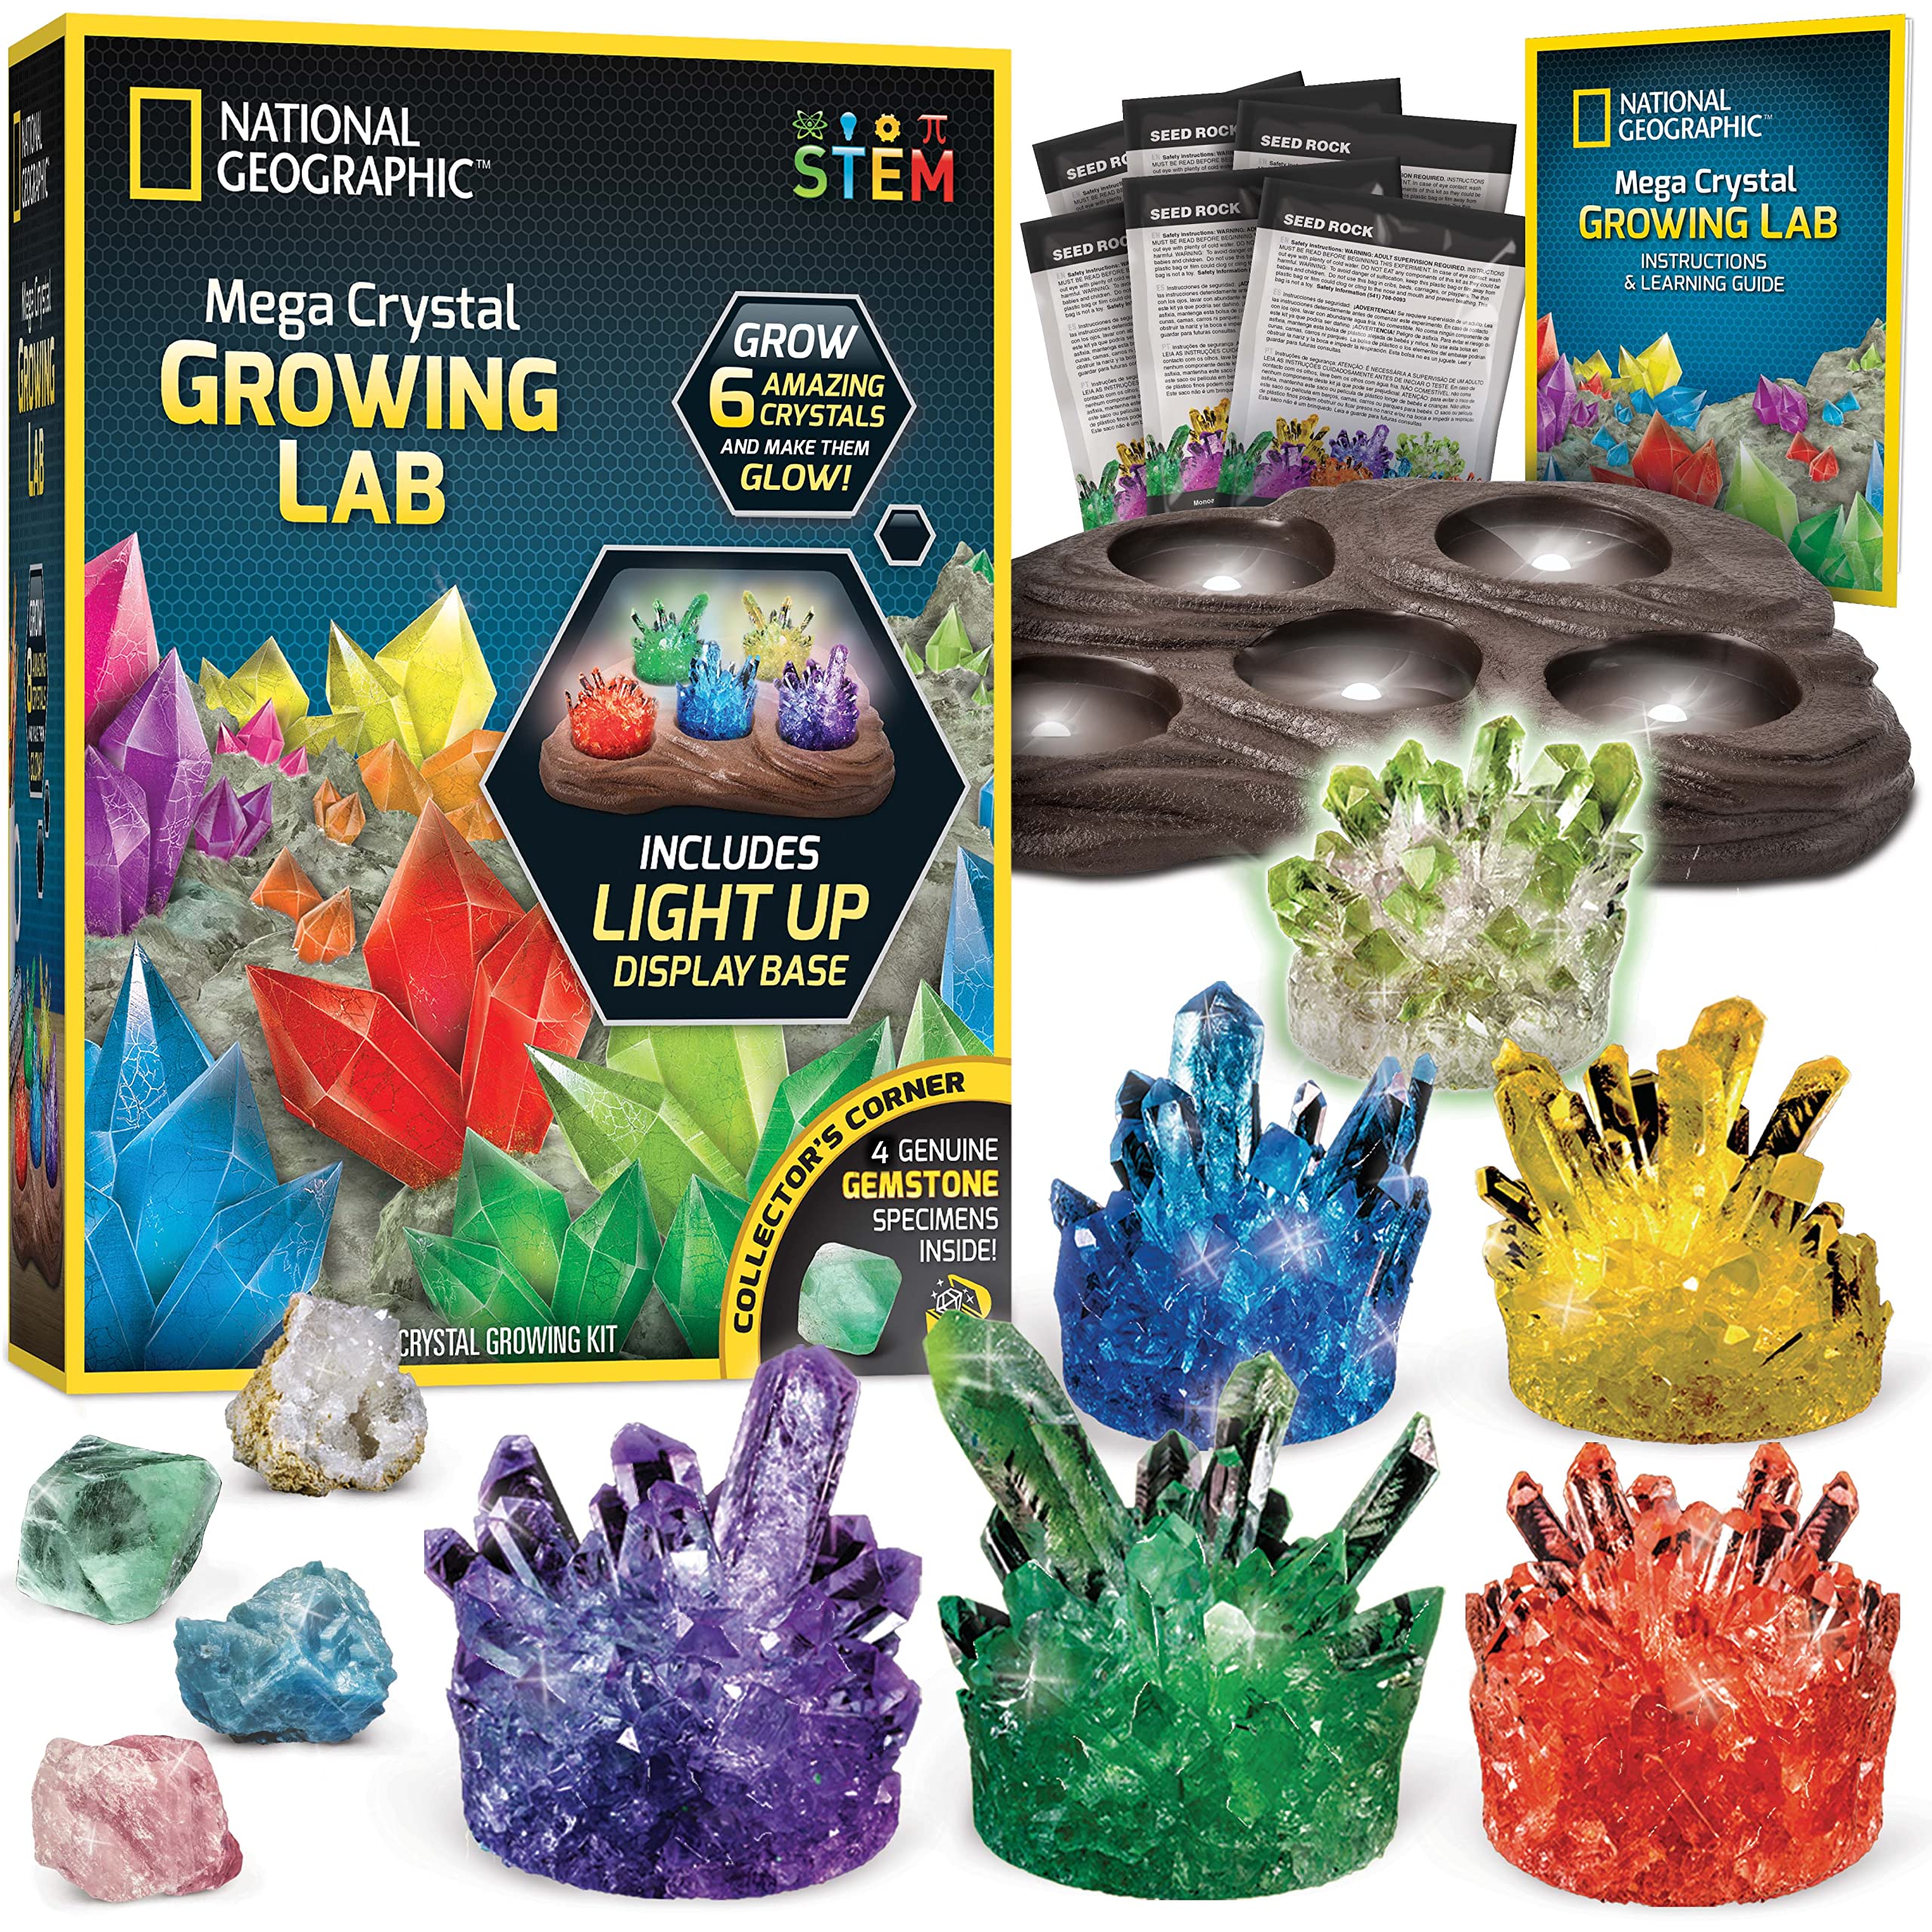 NATIONAL GEOGRAPHIC Mega Crystal Growing Kit for Kids – Grow 6 Vibrant Crystals Fast (3-4 Days), with Light-Up Display Stand and Real Gemstones, Crystal Making Science Kit (Amazon Exclusive)